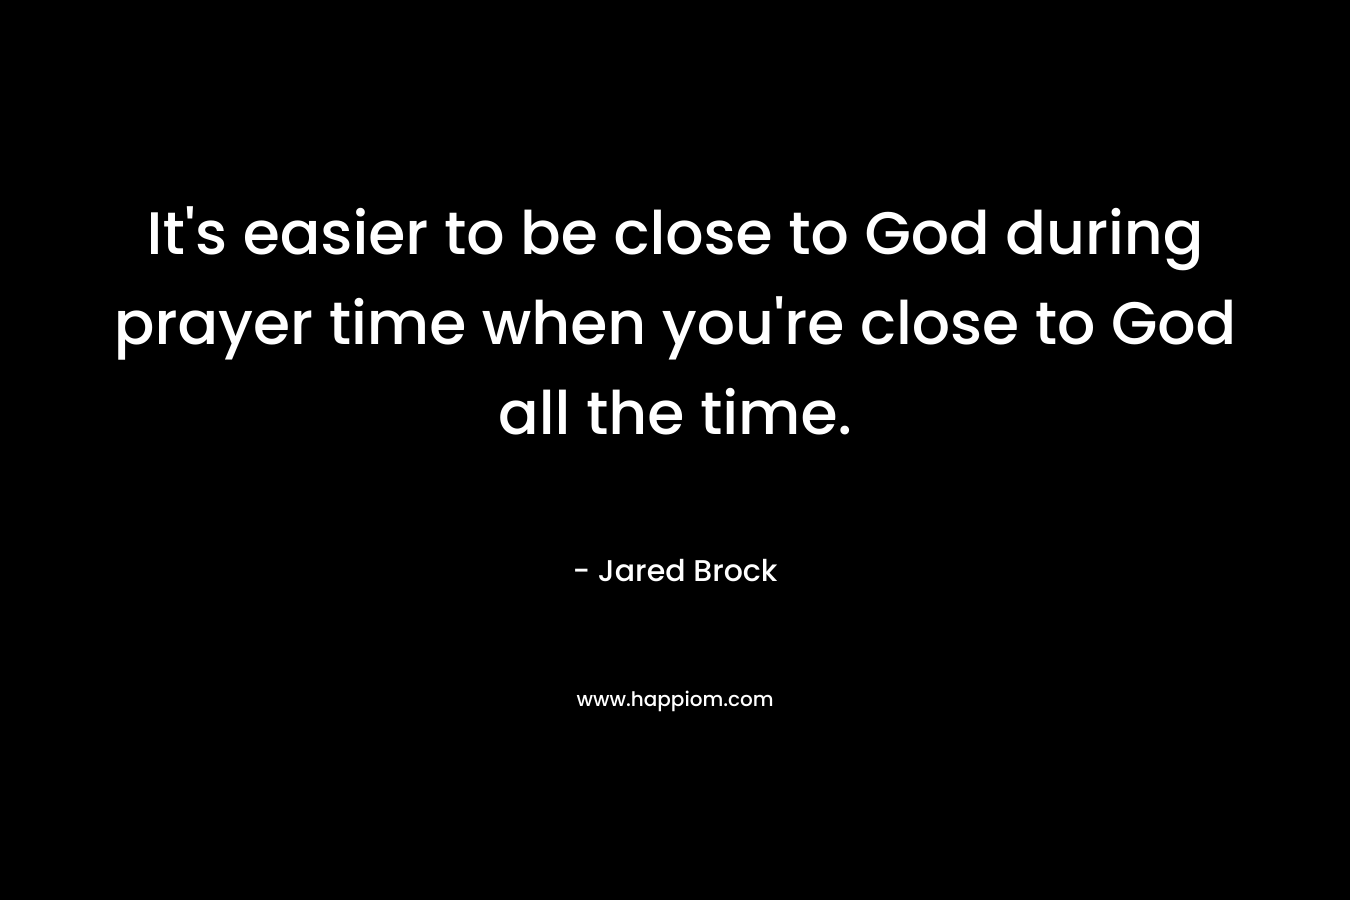 It's easier to be close to God during prayer time when you're close to God all the time.